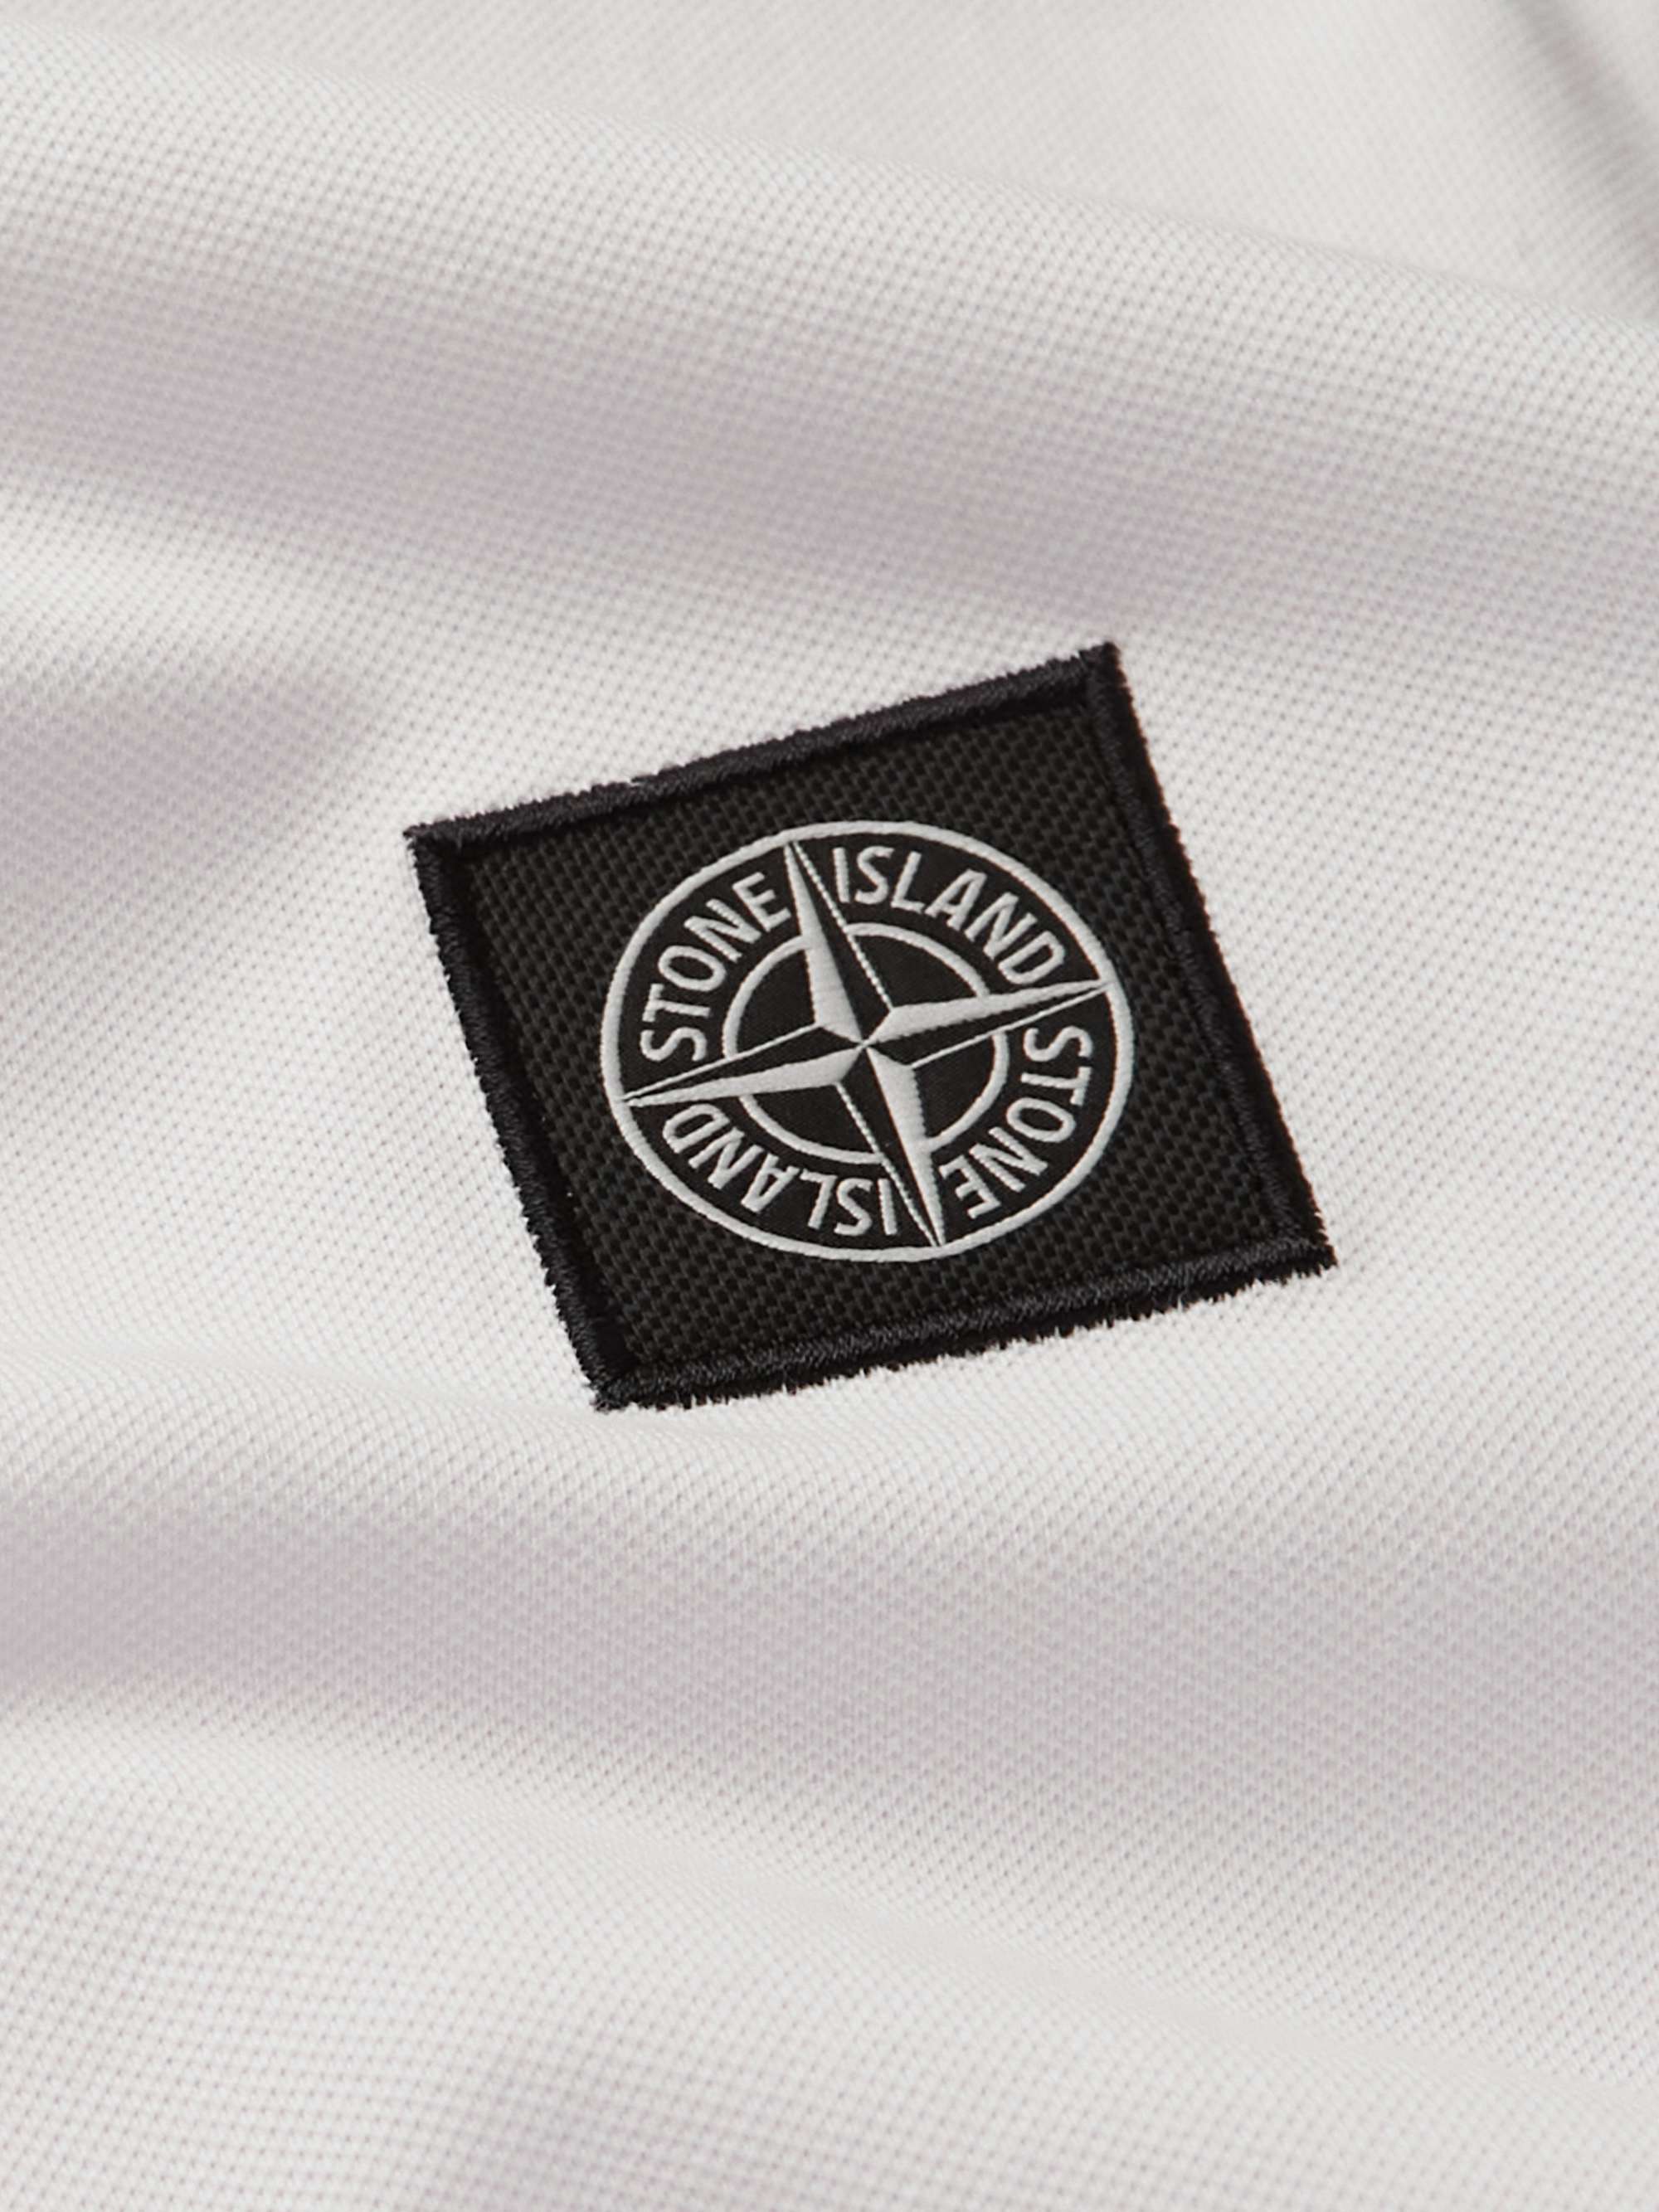 STONE ISLAND Slim-Fit Contrast-Tipped Stretch-Cotton Piqué Polo Shirt